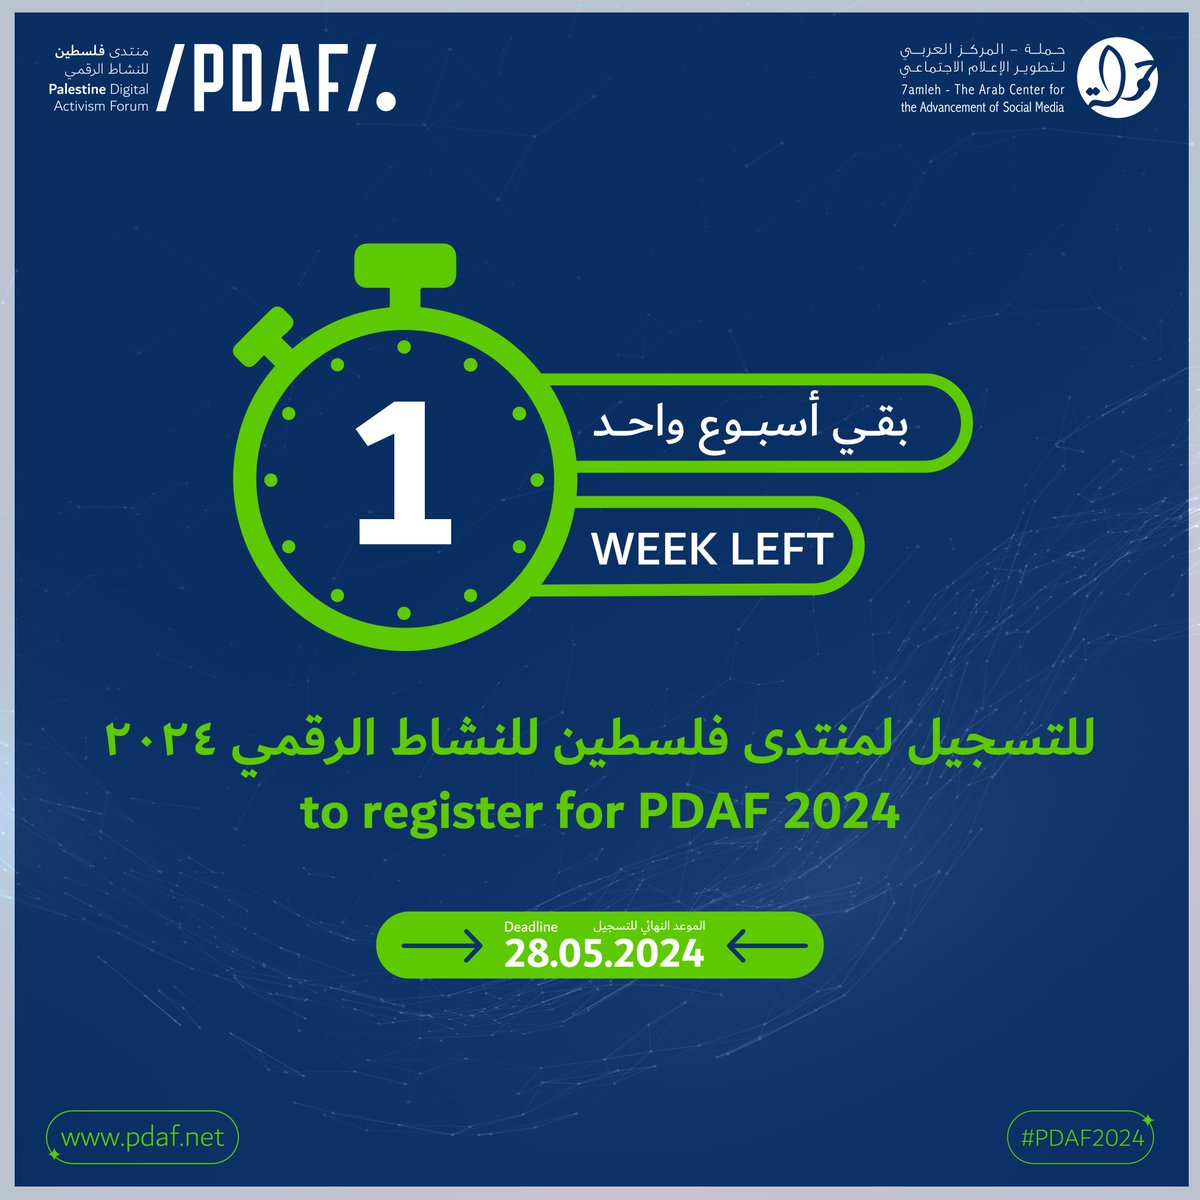 🚨Only 1 week left to register for the Palestine Digital Activism Forum 2024 (PDAF), don’t miss the chance to attend the forum’s virtual activities on the 4th and 5th of next JUNE! 📌Reserve your seat now: pdaf.net #PDAF2024